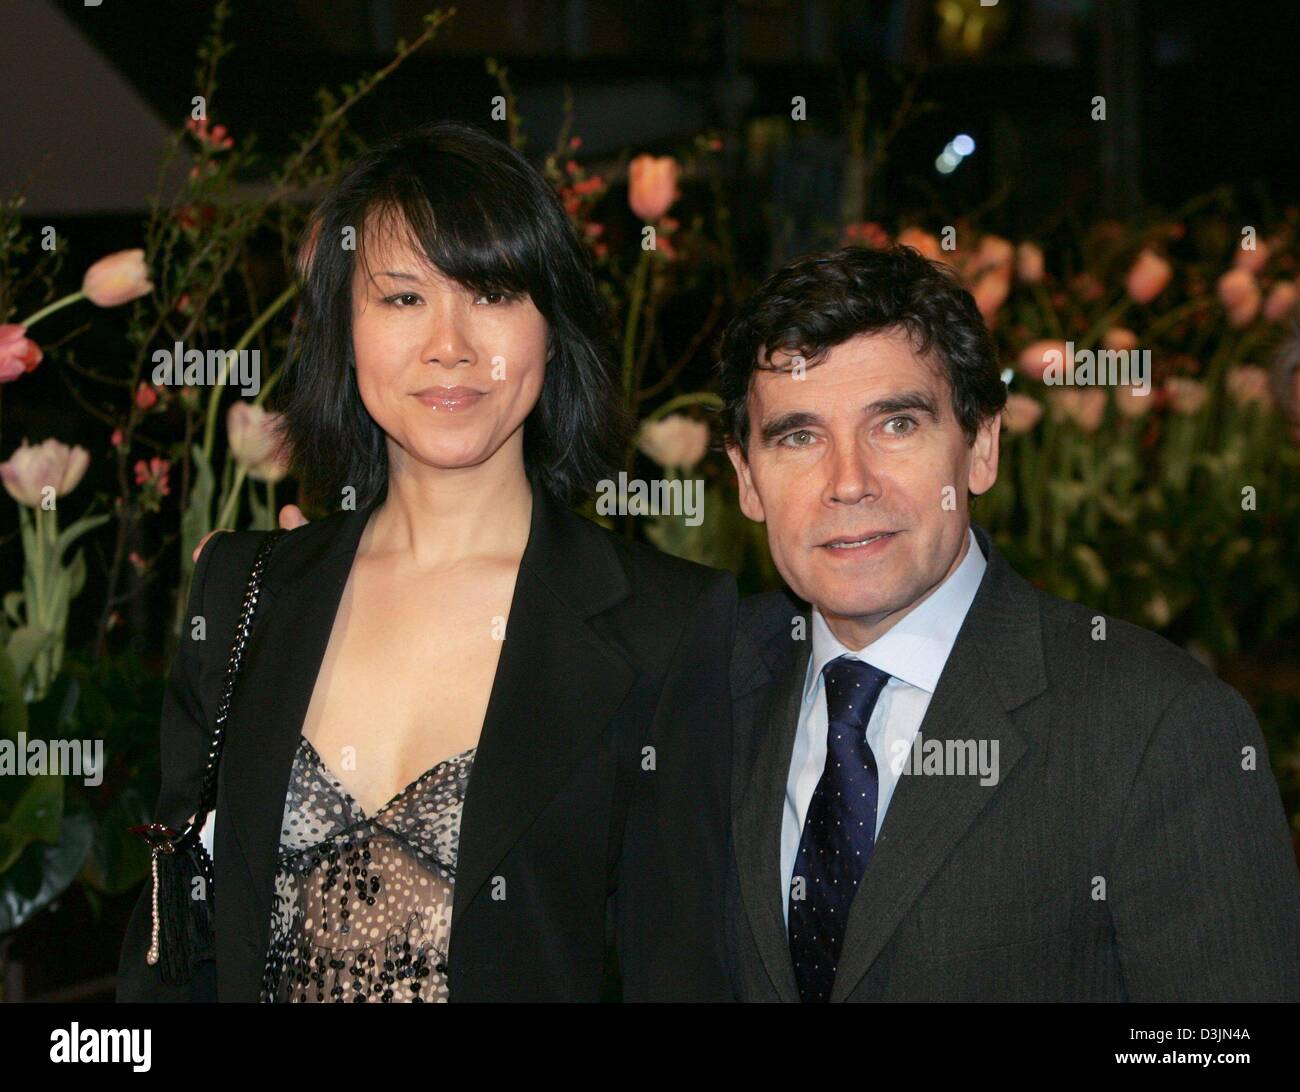 (dpa) - Claude Martin, French ambassador to Germany, and his wife Judith pictured prior to the start of the French film 'Le Temps Qui Changent' on the red carpet during the 55th Berlinale international film festival in Berlin, Germany, 12 February 2005. Stock Photo